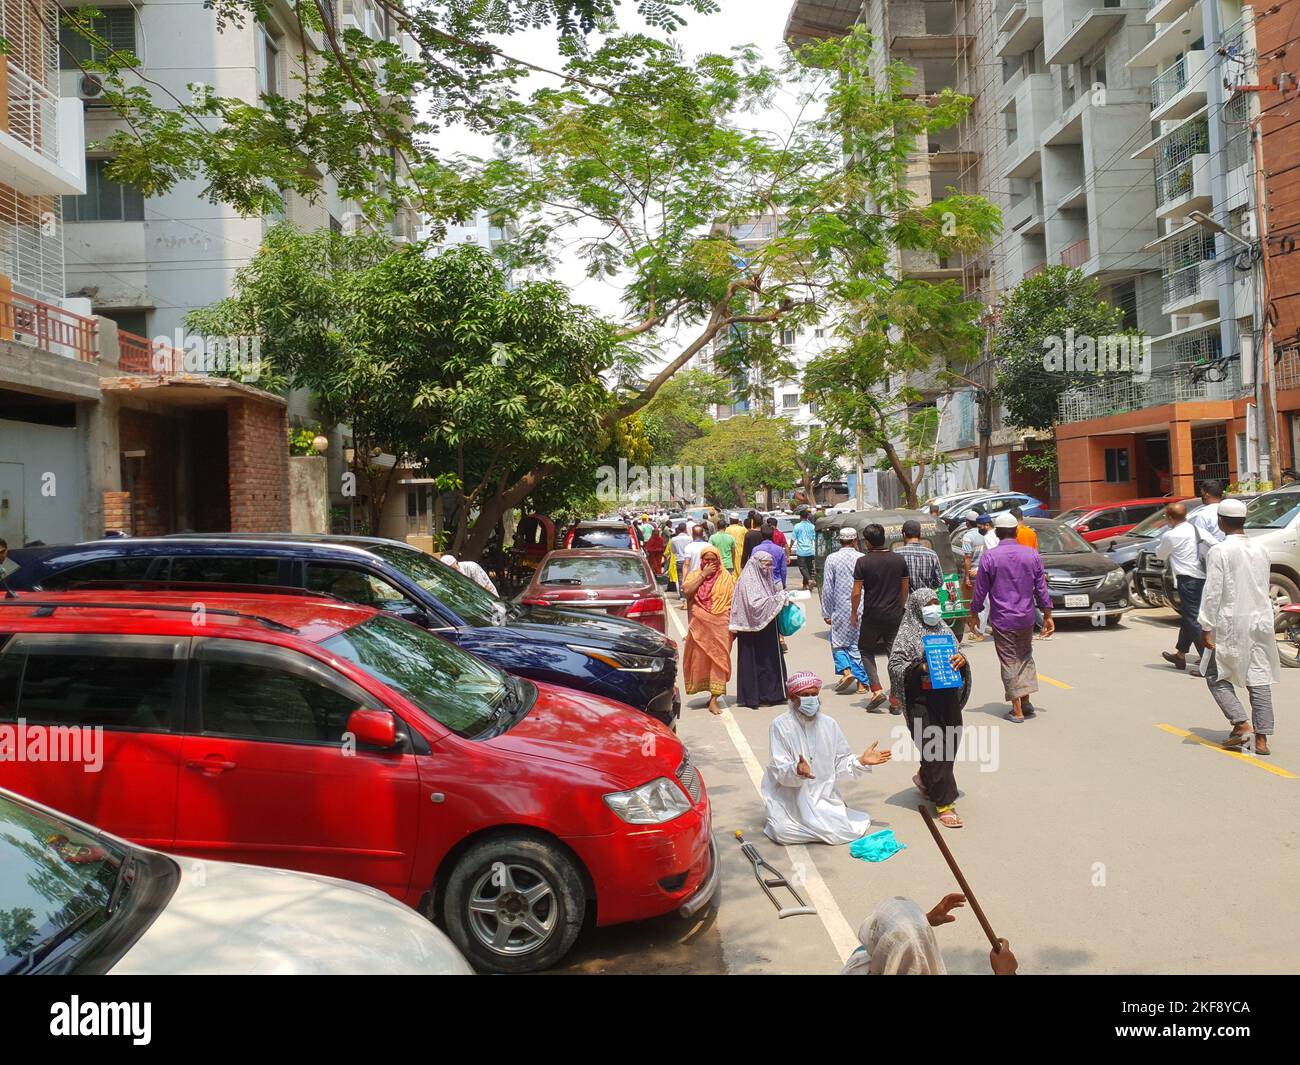 May 26 2022 Bashundhara R/A, Dhaka. A scene like any other day in the residential area of Bashundhara. Stock Photo